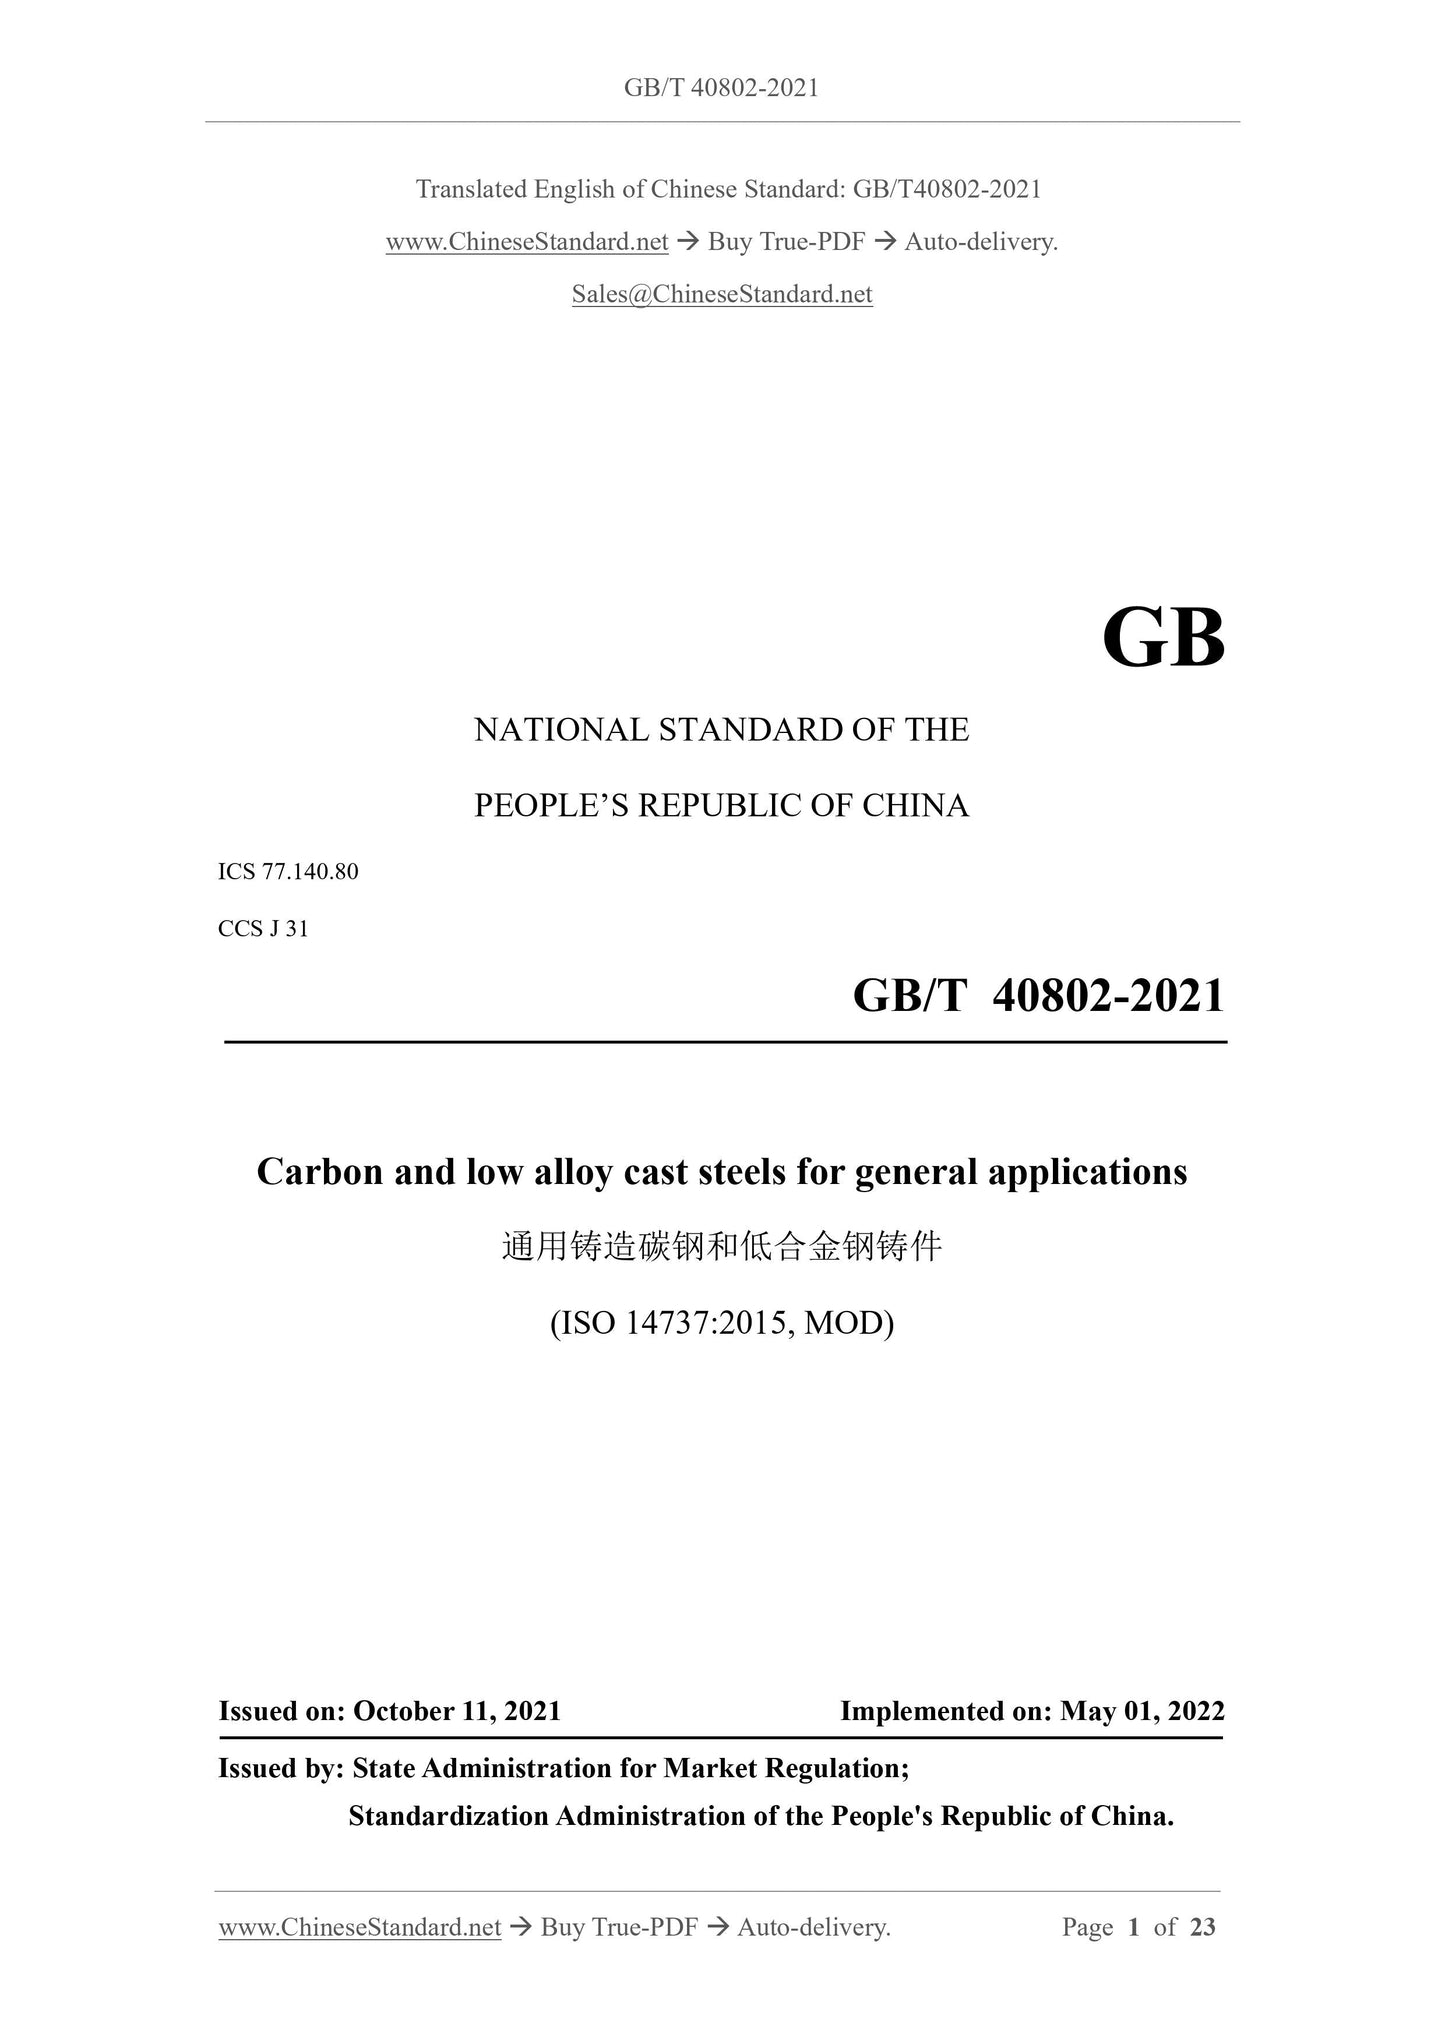 GB/T 40802-2021 Page 1